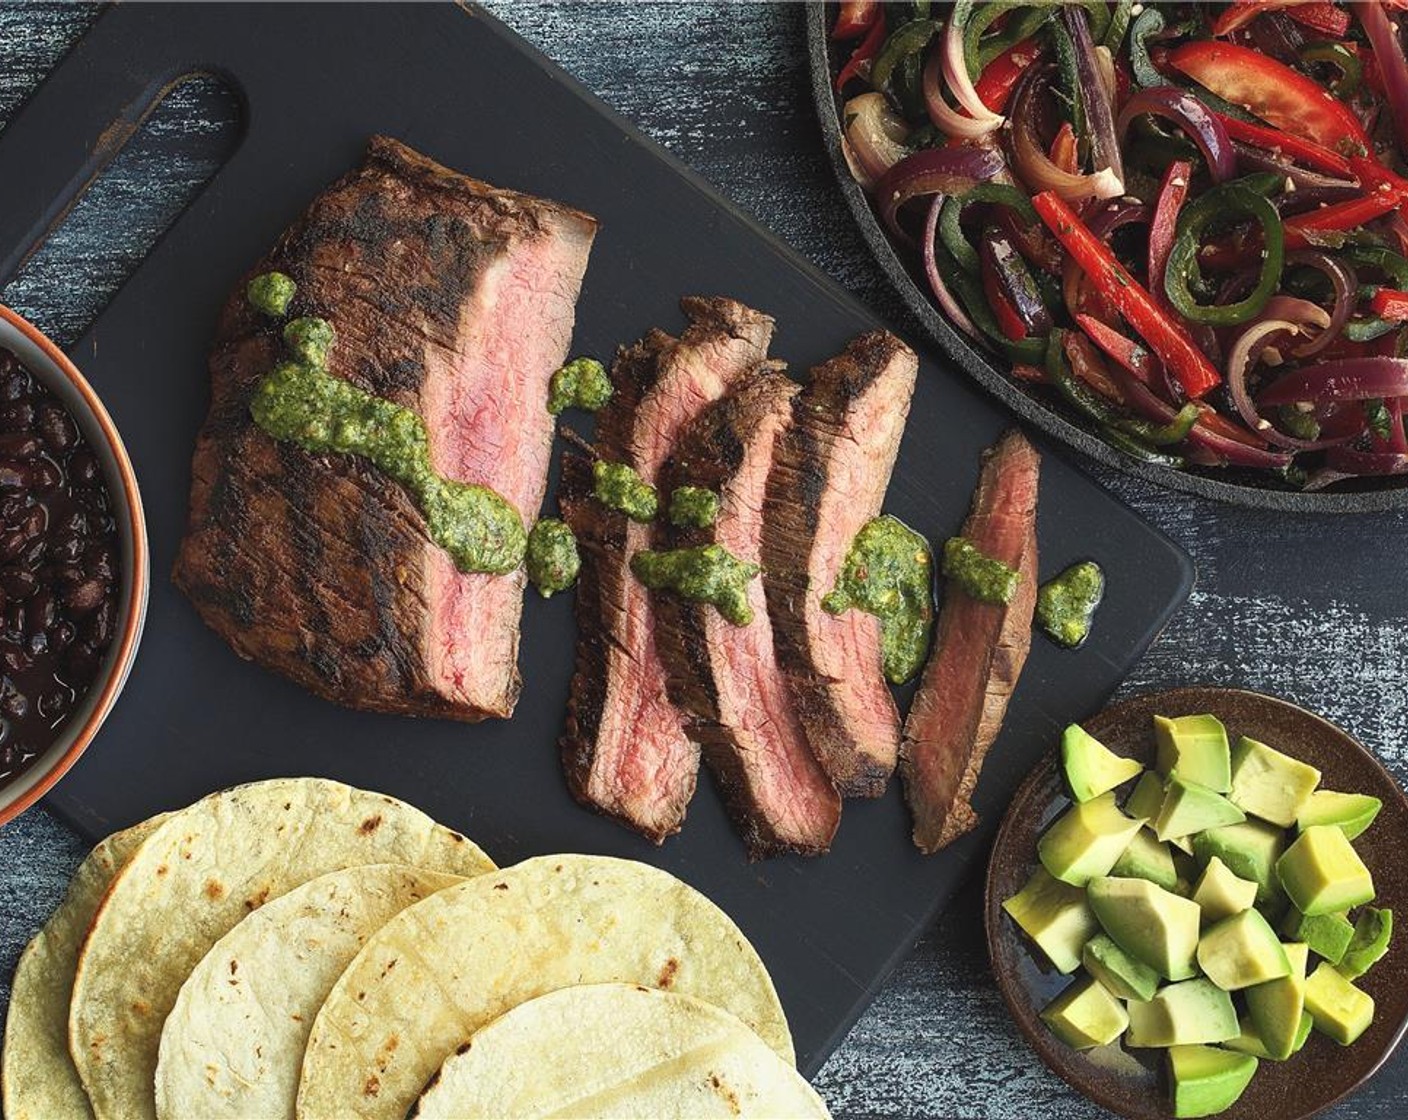 step 16 Slice the flank steak in 1/2-inch slices against the grain. Drizzle the chimichurri over the meat. Place bell pepper mixture, cumin lime black beans, avocado, and corn tortillas on the side. Serve family-style.